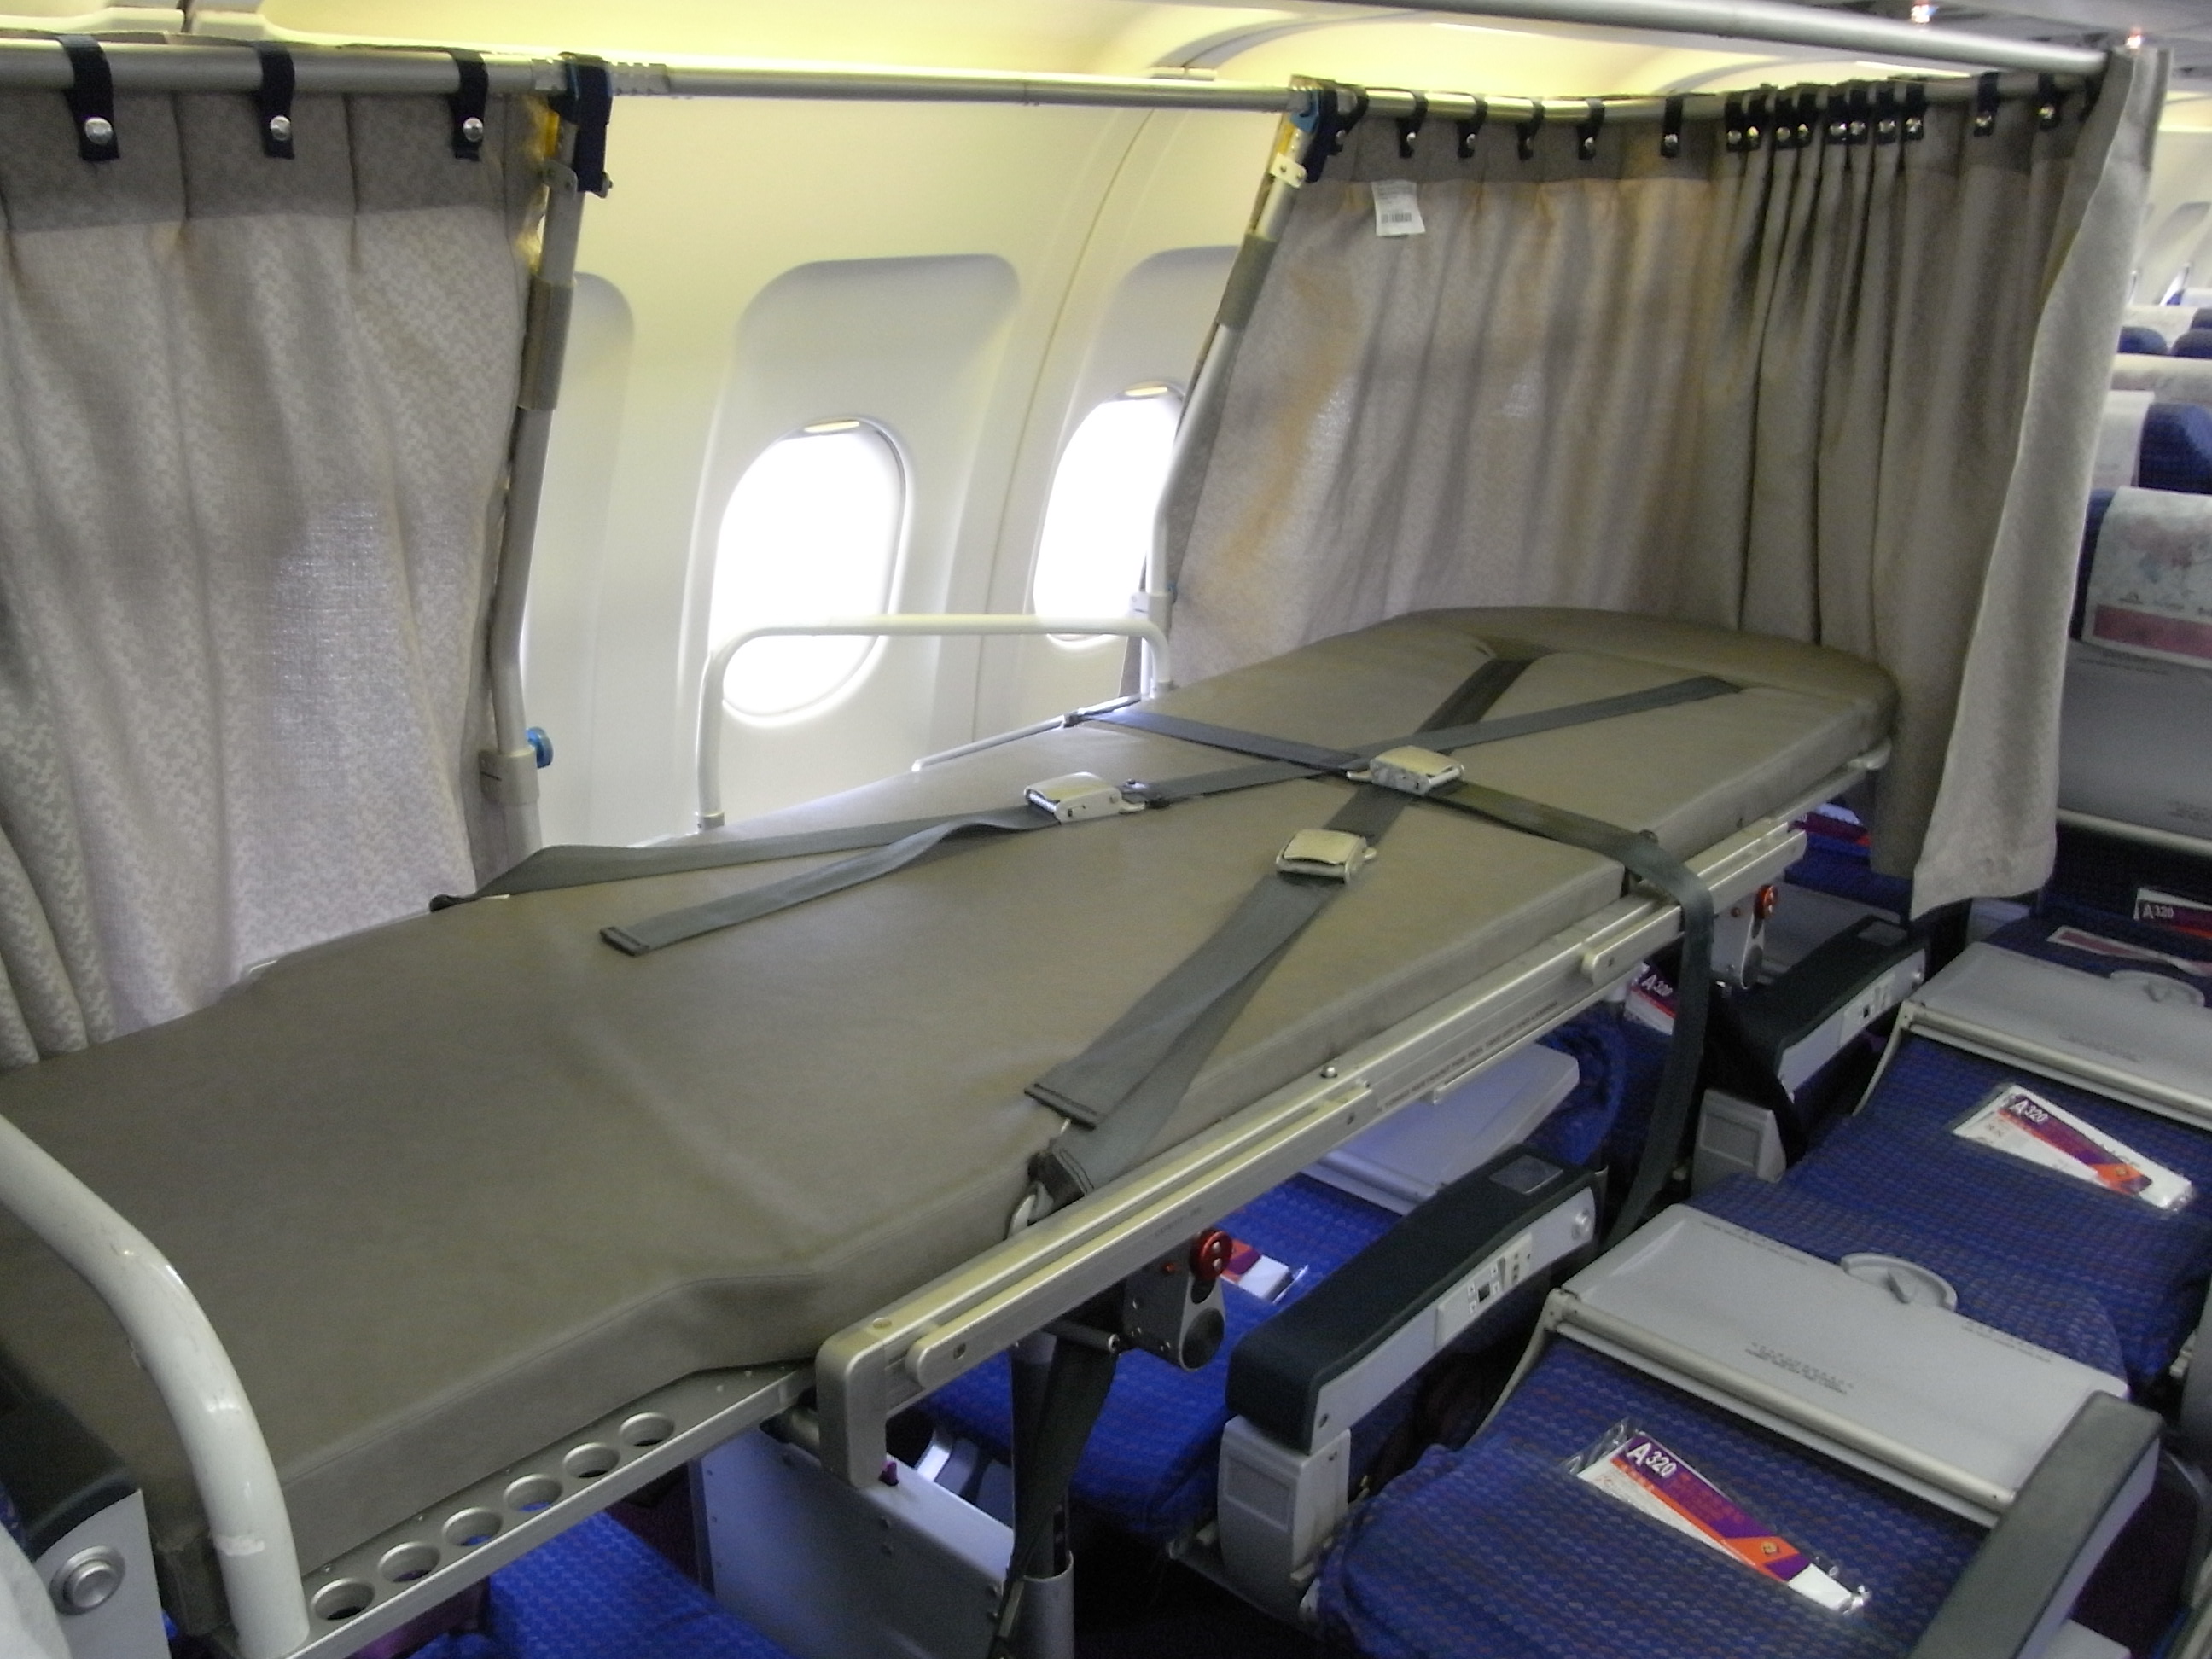 A commercial airline stretcher